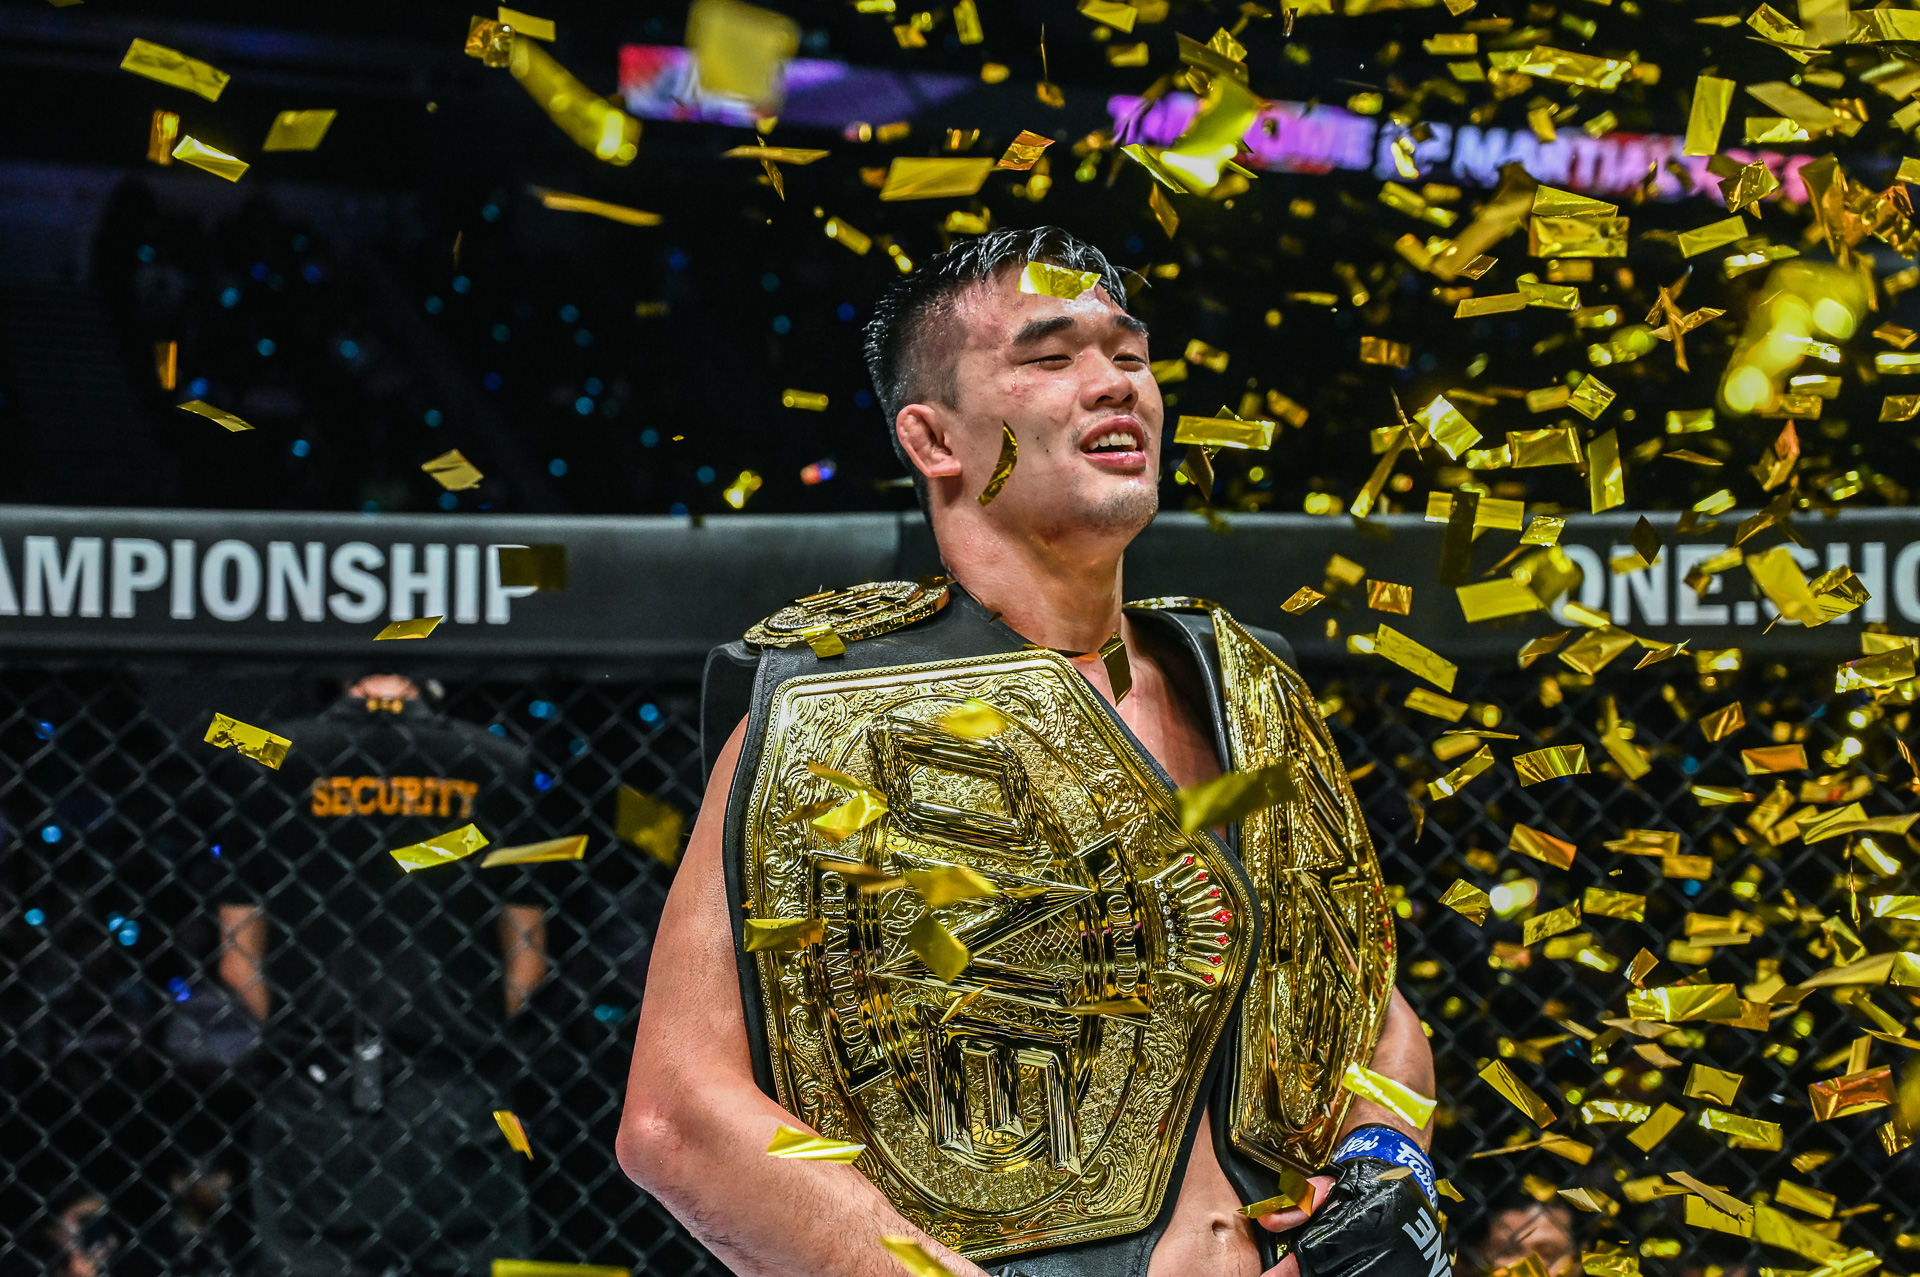 Christian Lee becomes the new ONE Welterweight World Champion